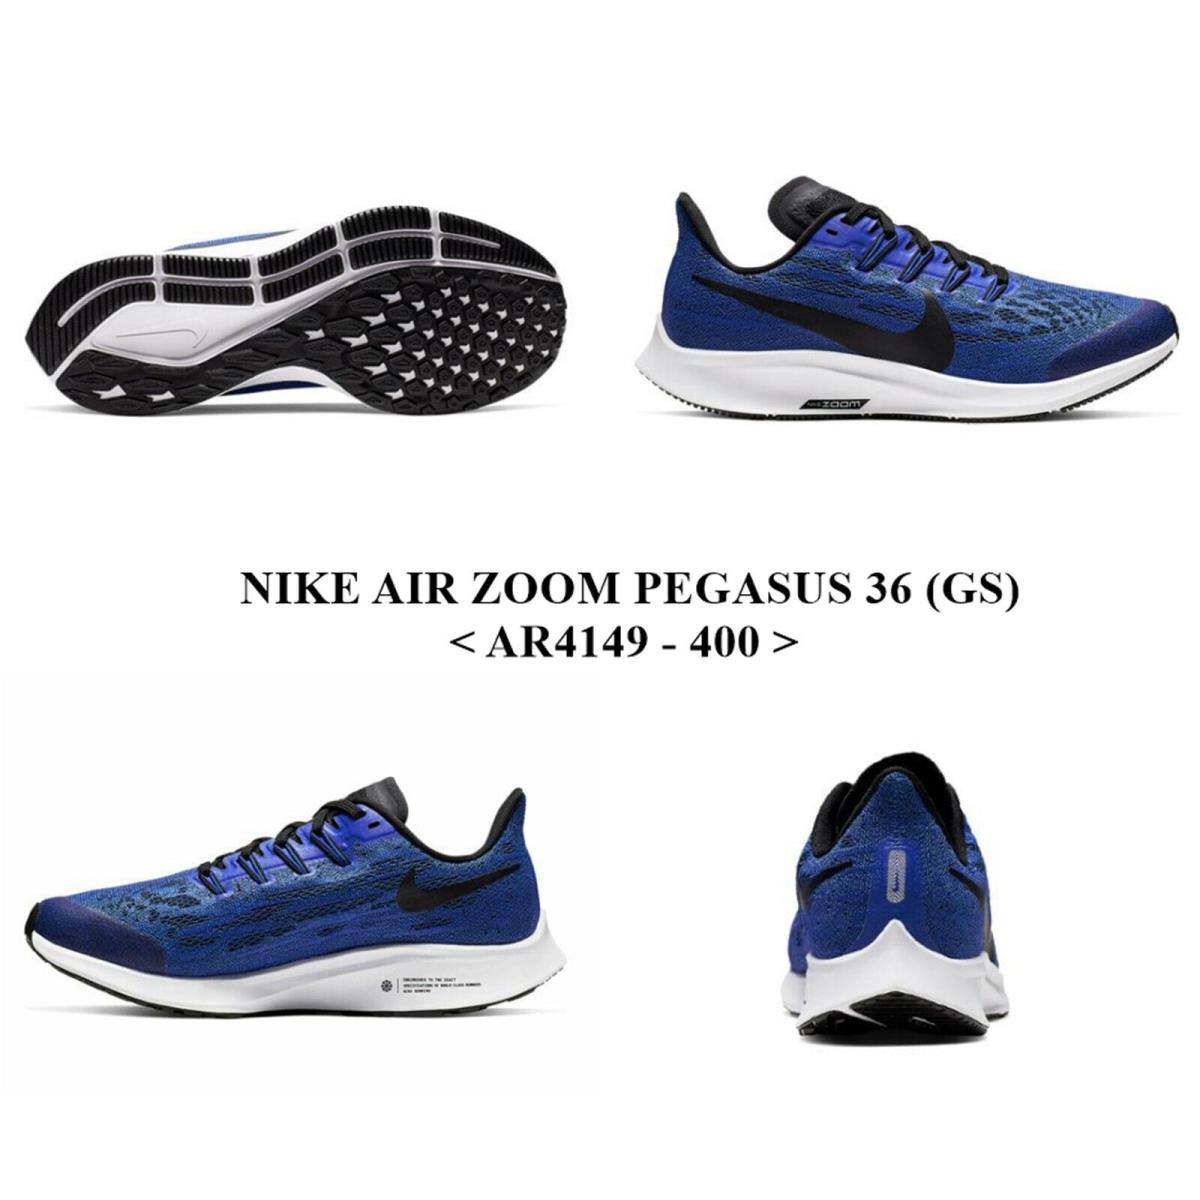 Nike Air Zoom Pegasus 36 GS AR4149 - 400 Young Running/casual Shoe - RACER BLUE/BLACK-WHITE